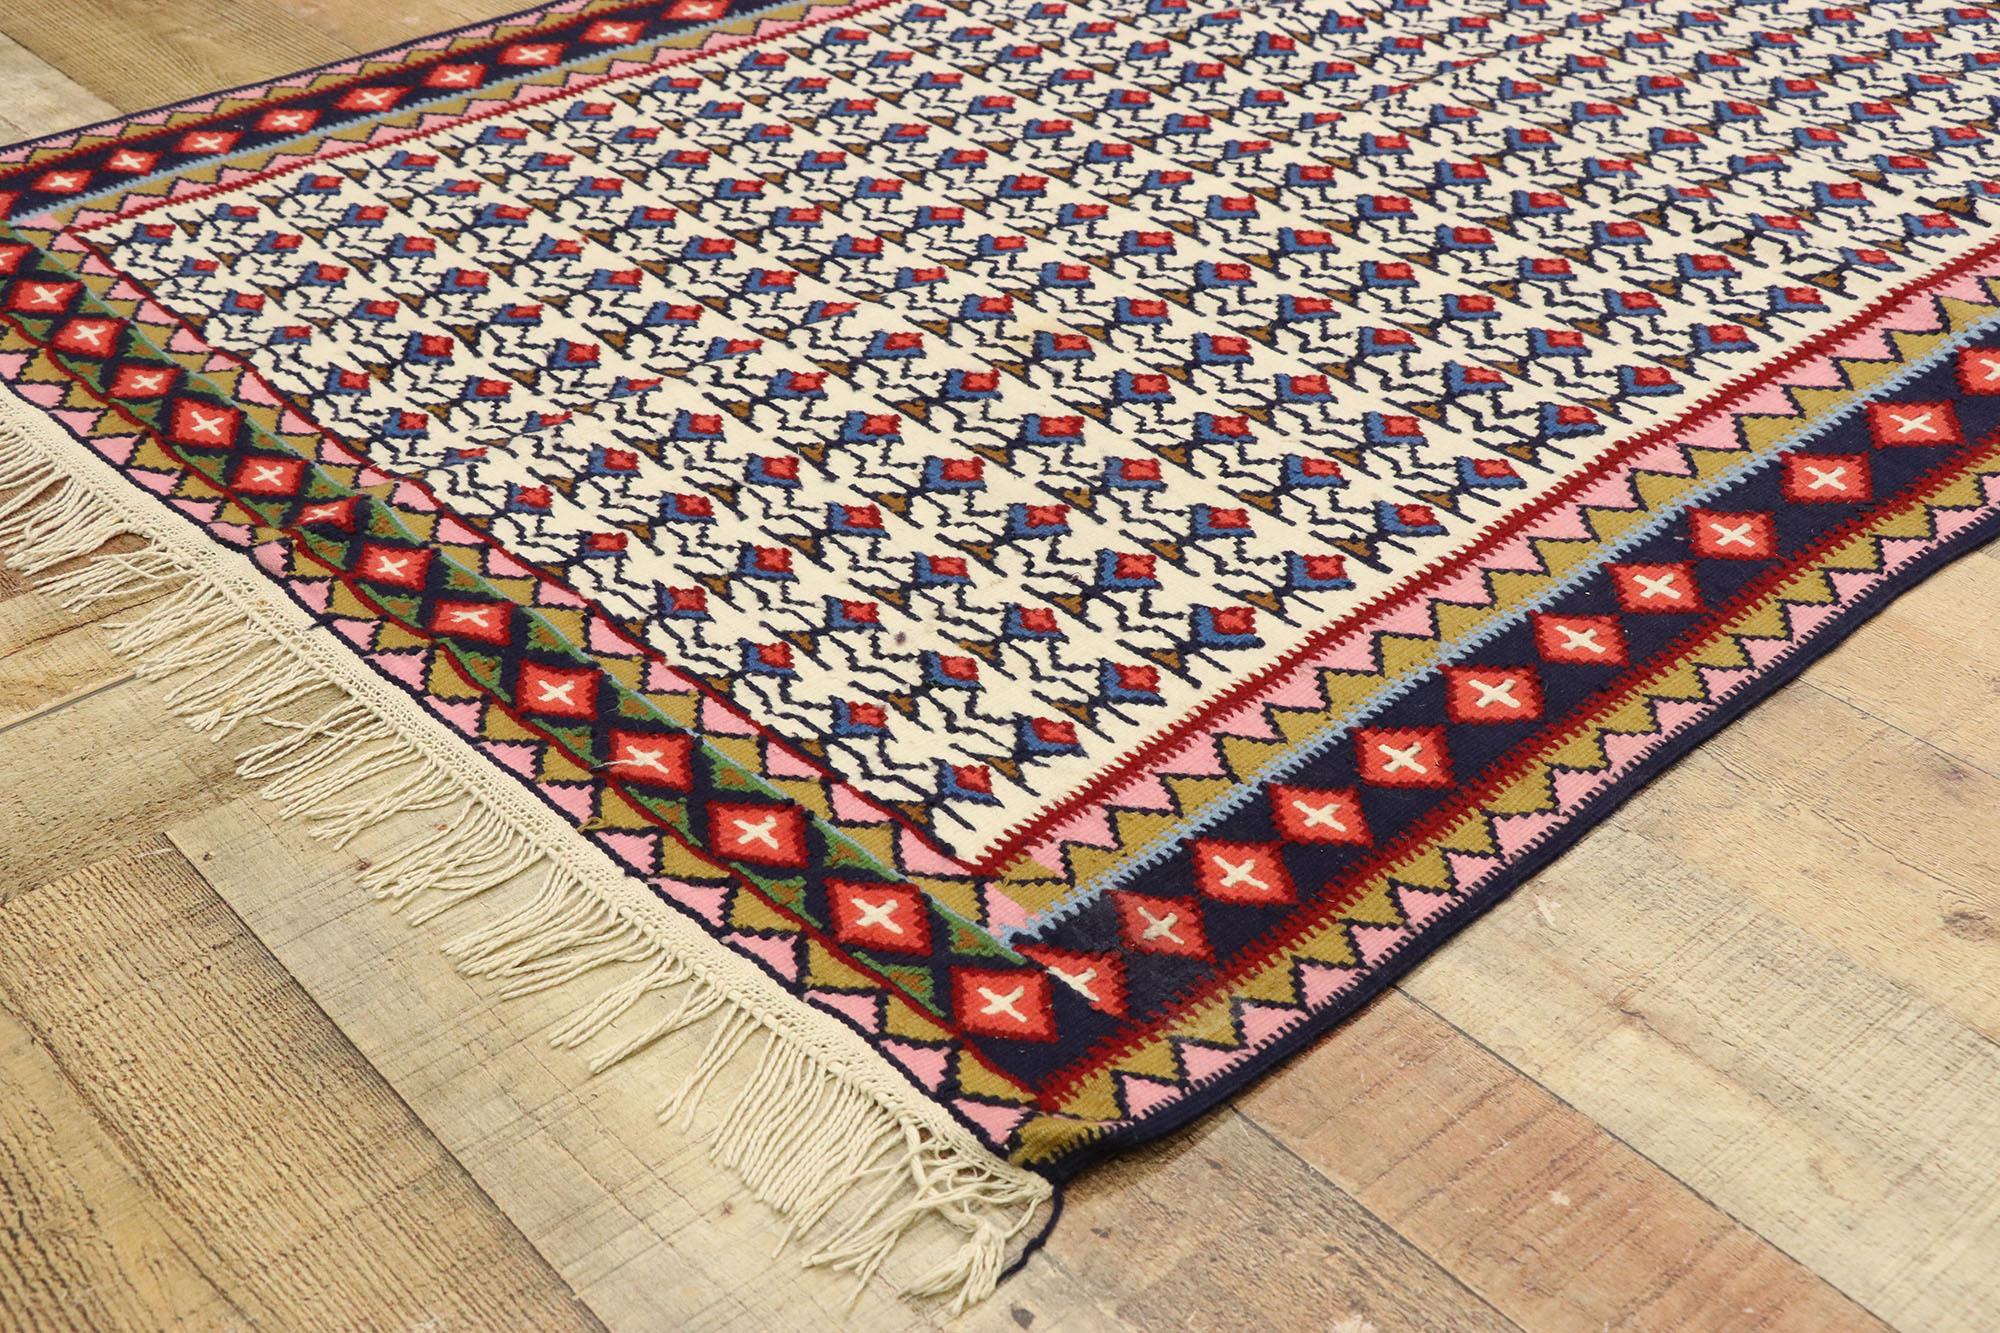 Vintage Persian Senneh Sanadaj Kilim Rug with Relaxed Federal and Nautical Style In Fair Condition For Sale In Dallas, TX